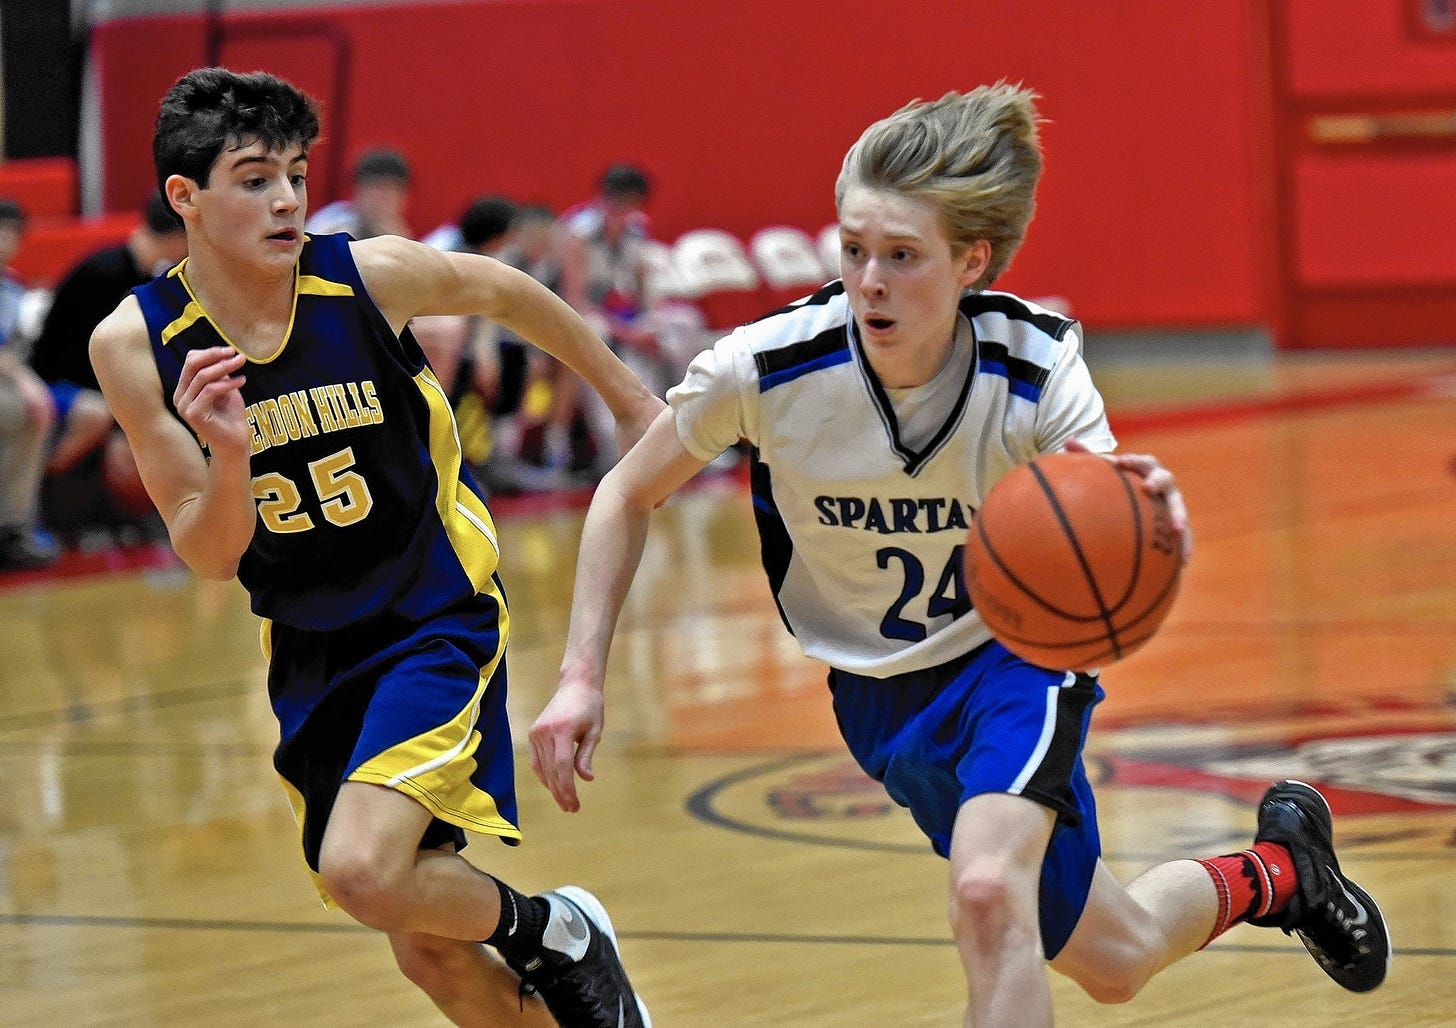 Hinsdale, Clarendon Hills middle schools basketball rivalry brings crowd to Hinsdale Central ...